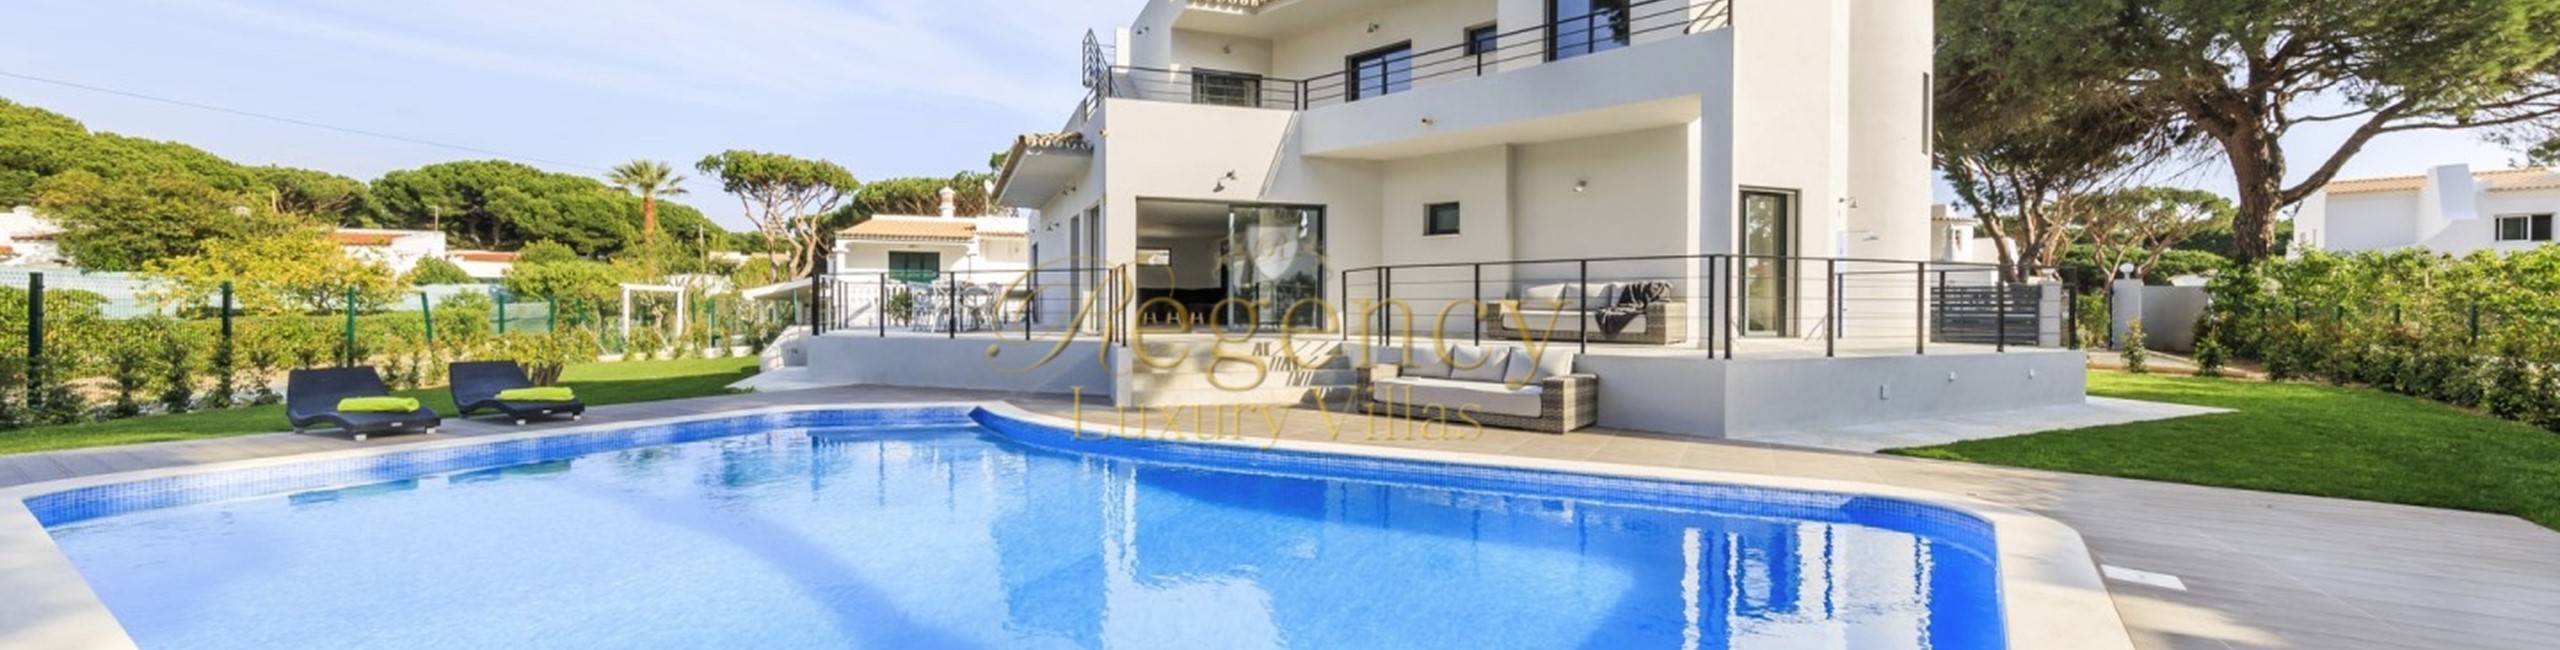 Villa To Rent With Private Swimming Pool In Vilamoura 4 Bedroom Luxury Villa RLV